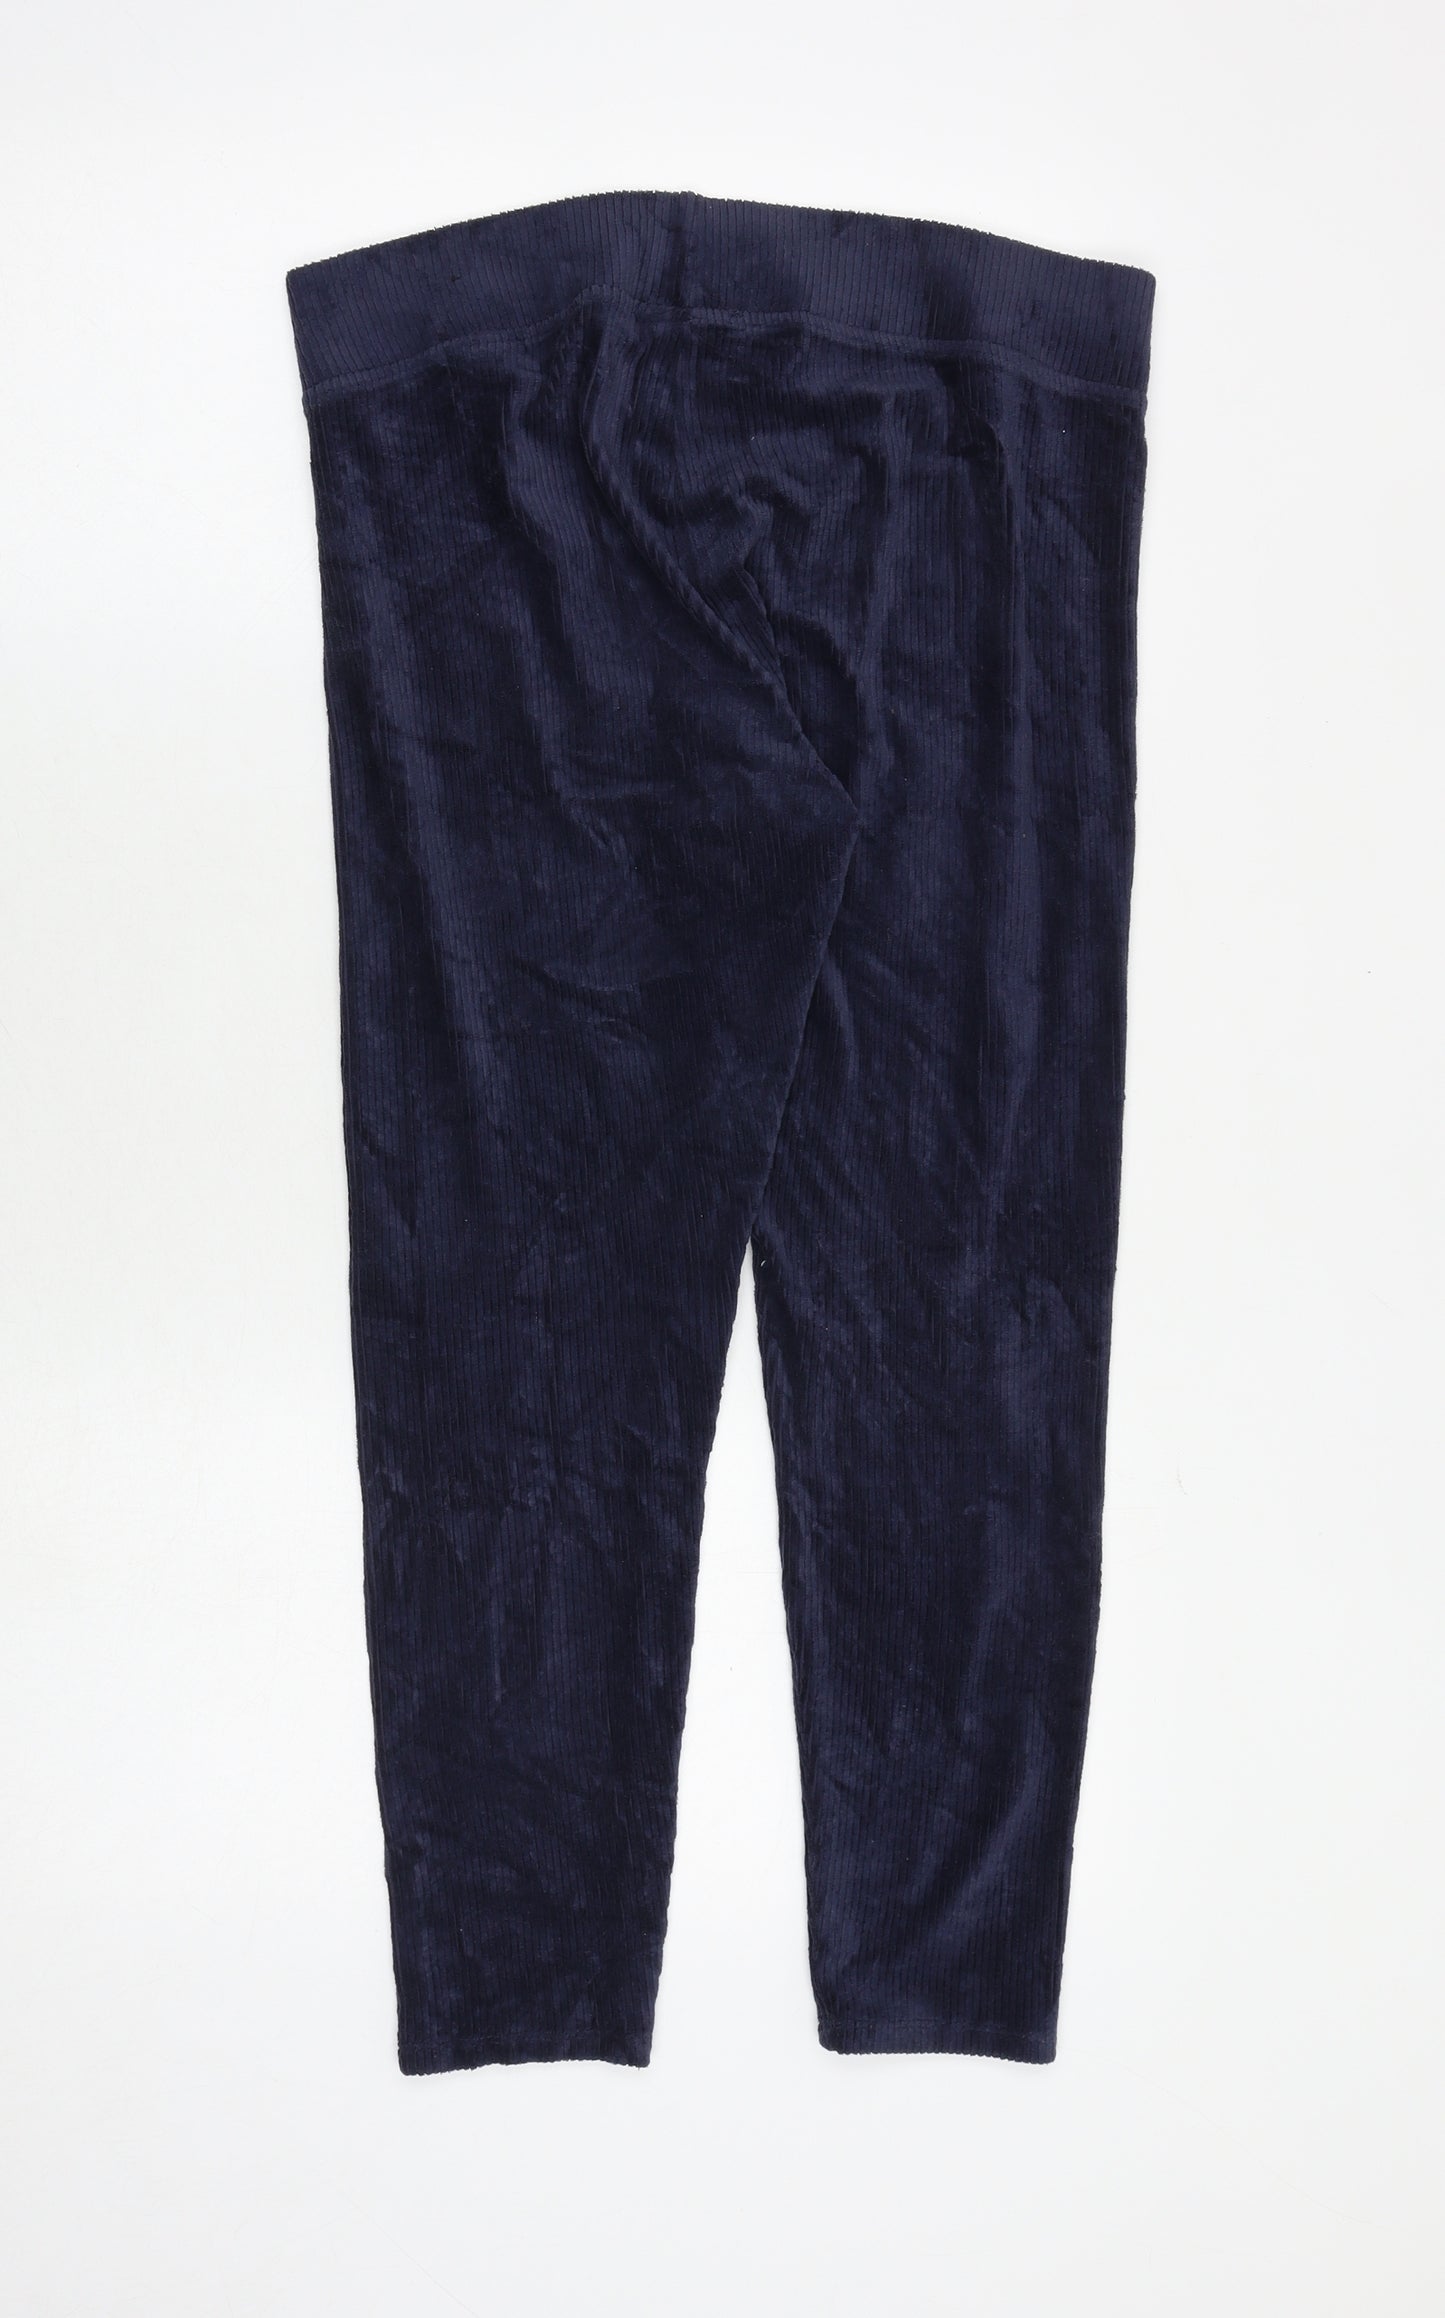 Marks and Spencer Womens Blue Cotton Jegging Trousers Size 14 Regular